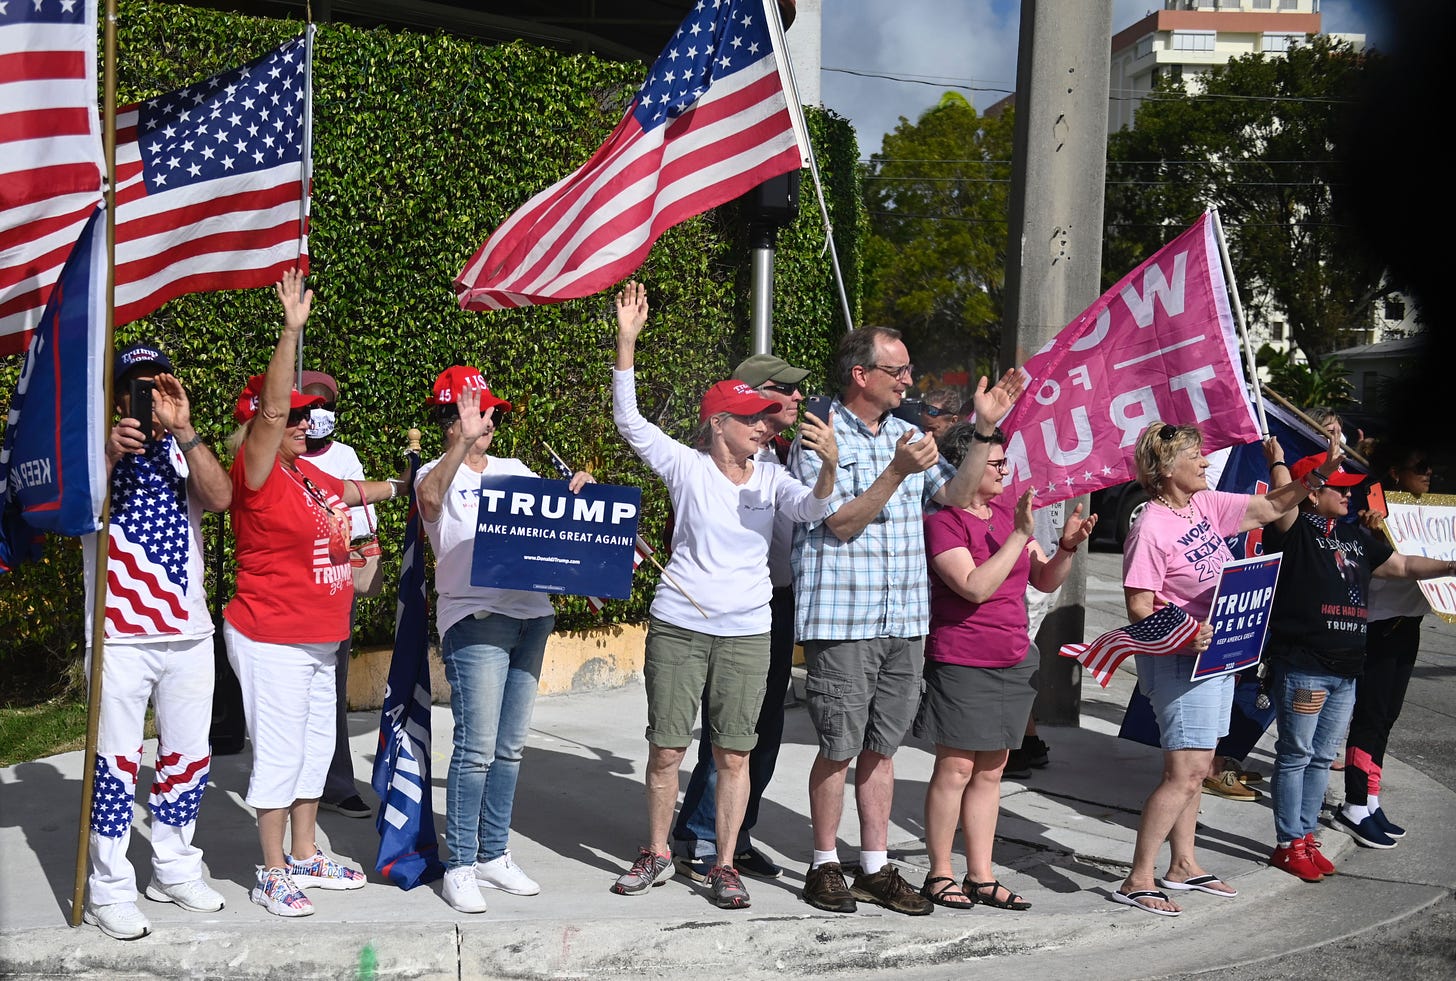 Supporters line the street as US president Donald Trump departs in West Palm Beach, Florida on December 31, 2020, as he travels back to Washington, DC after his Christmas holiday break in Mar-a-Lago. (Photo by ANDREW CABALLERO-REYNOLDS / AFP) (Photo by ANDREW CABALLERO-REYNOLDS/AFP via Getty Images)